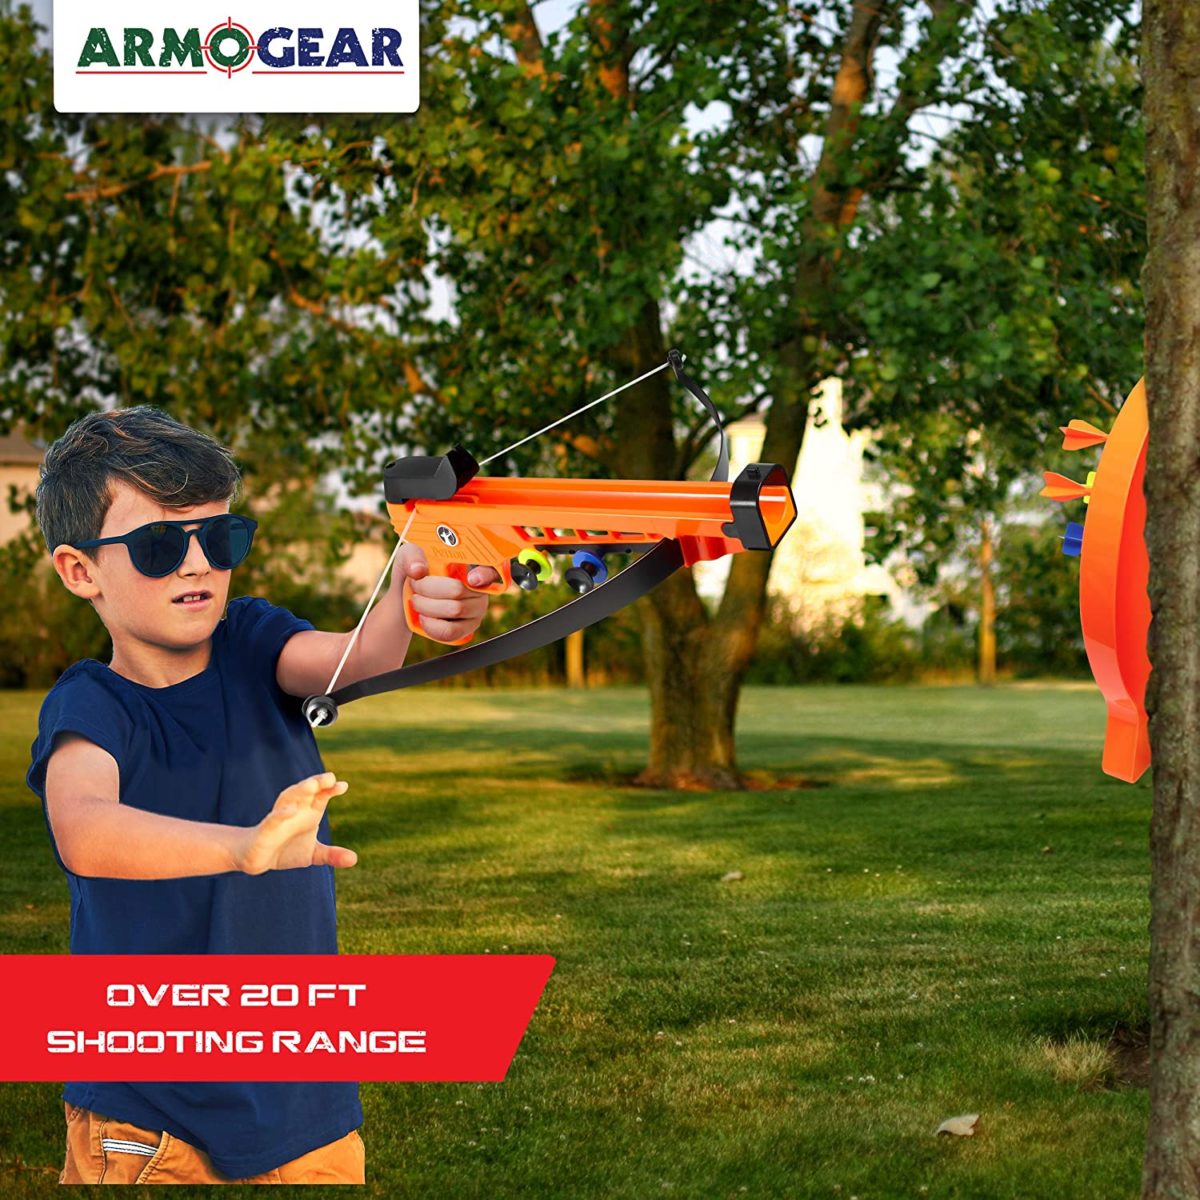 ArmoGear Kids Archery Set - Top Toys and Gifts for Ten Year Old Boys 2